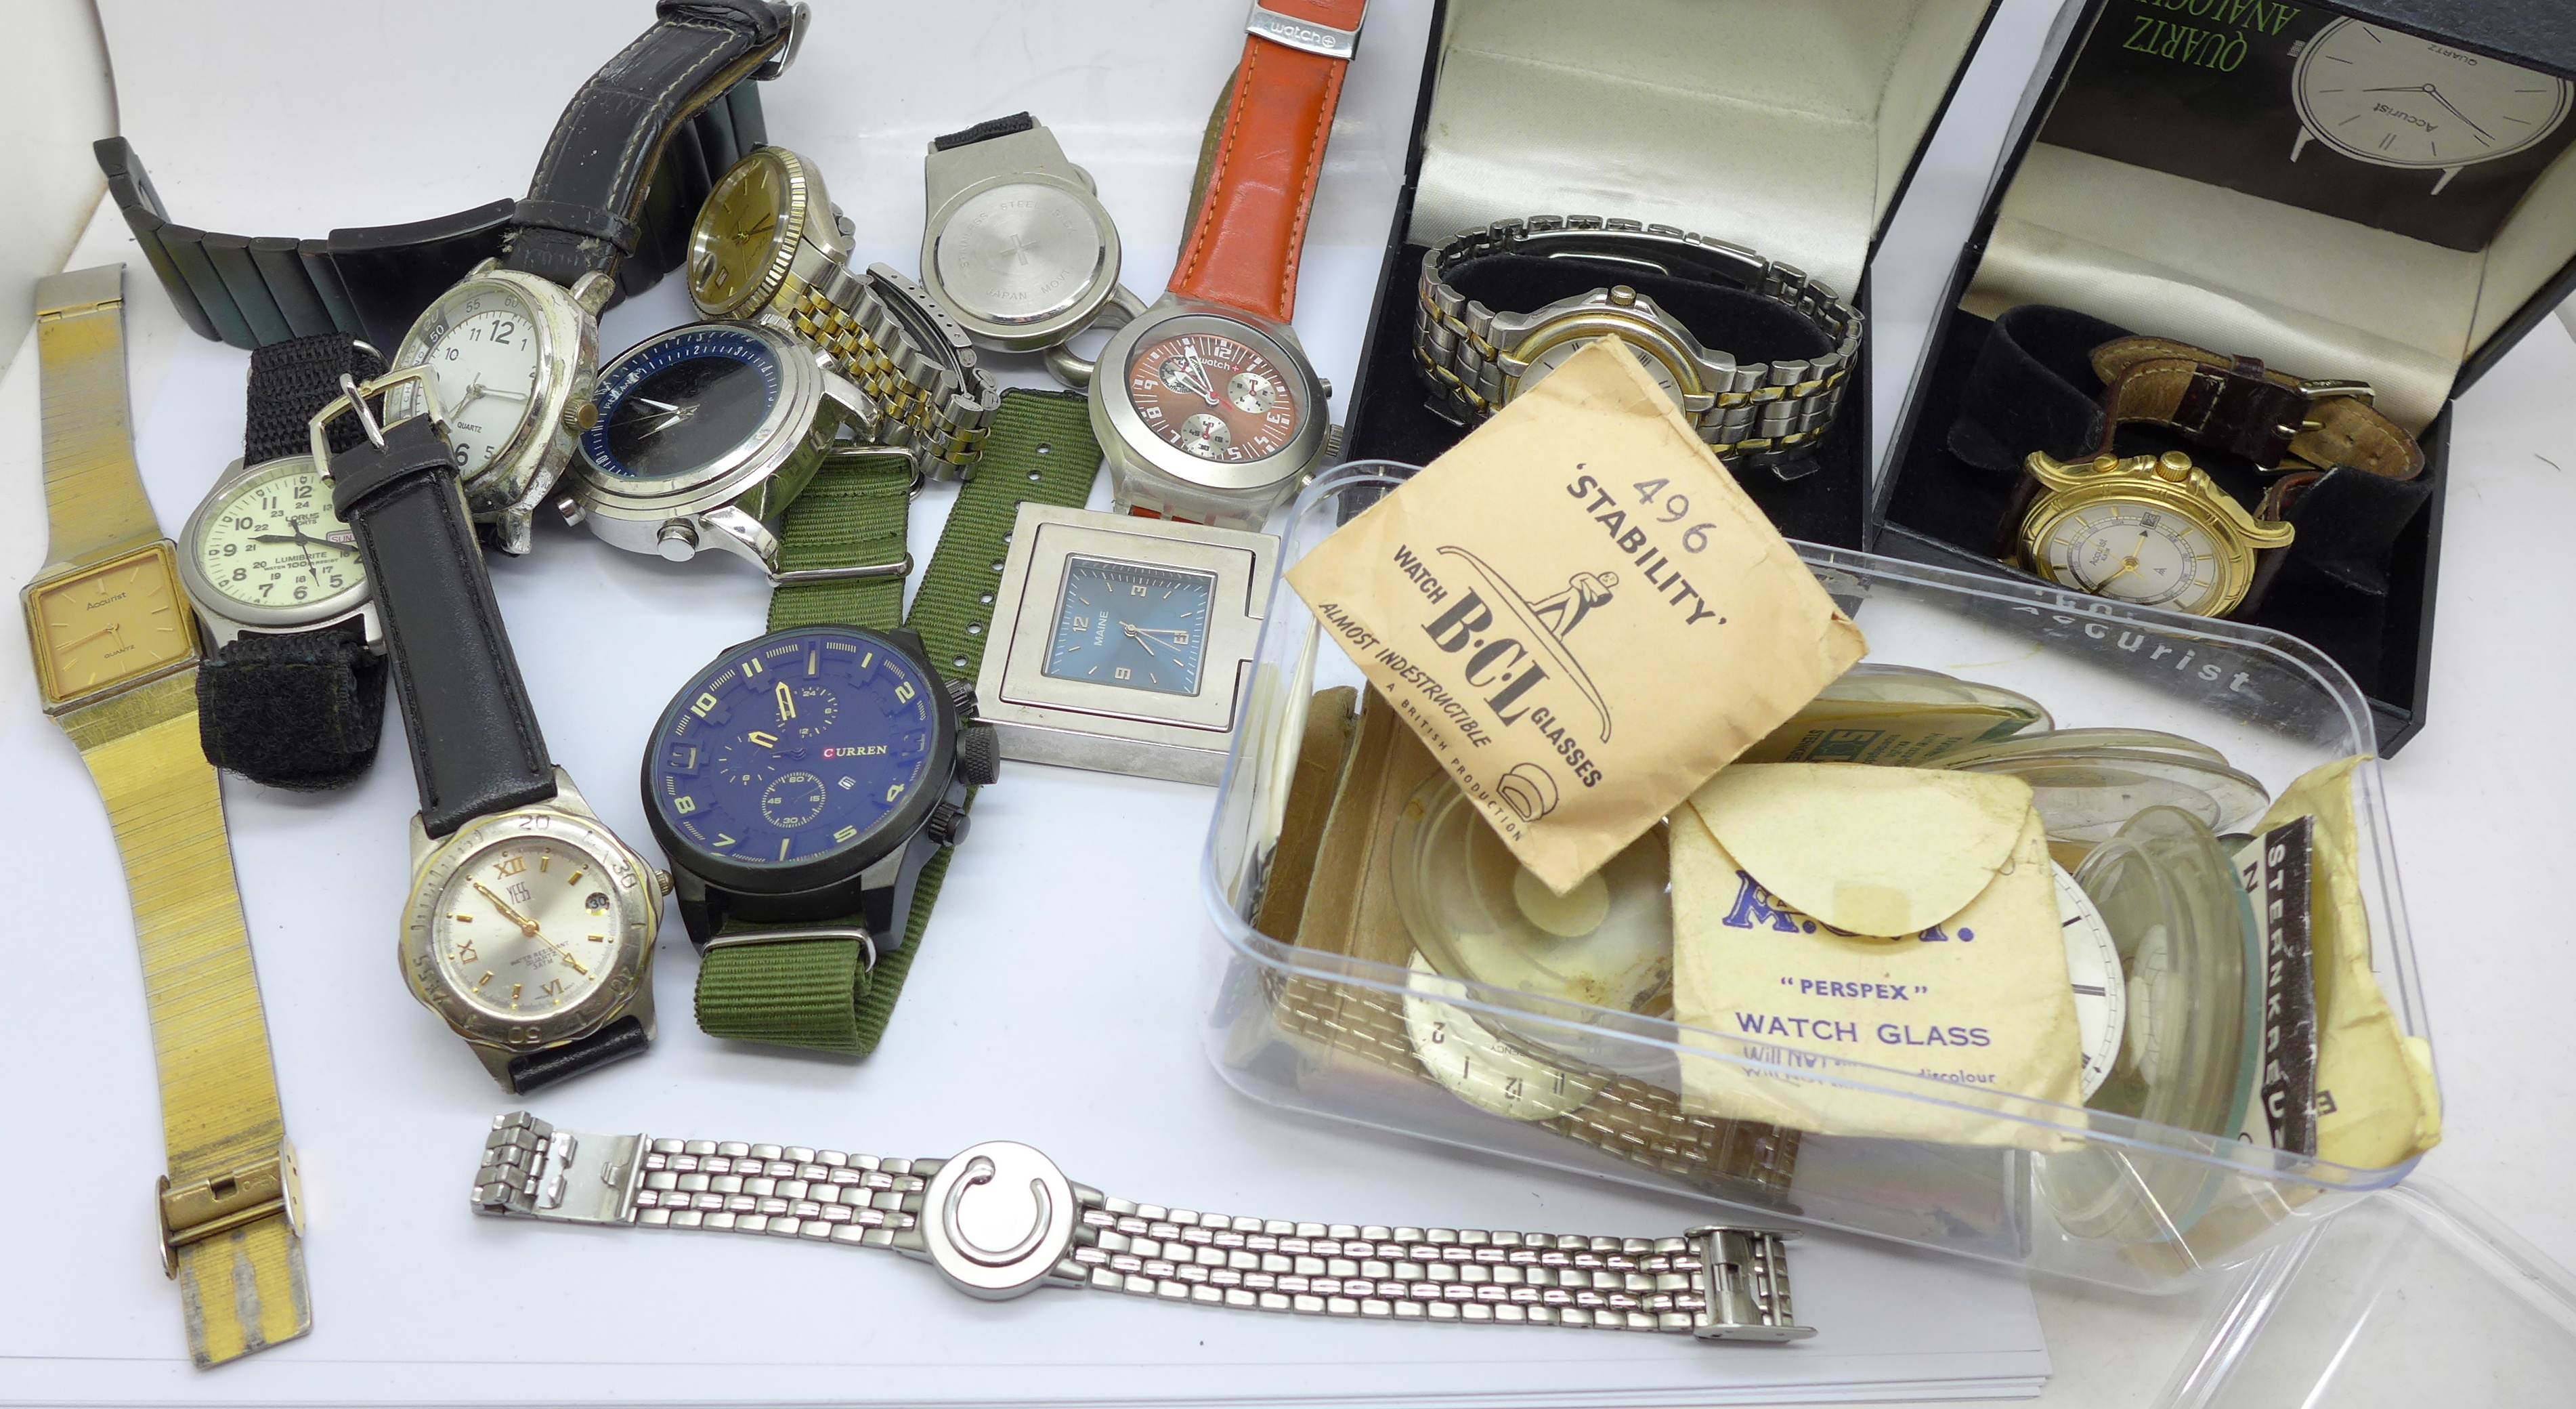 Wristwatches including Seiko and Accurist, watch glasses, etc.